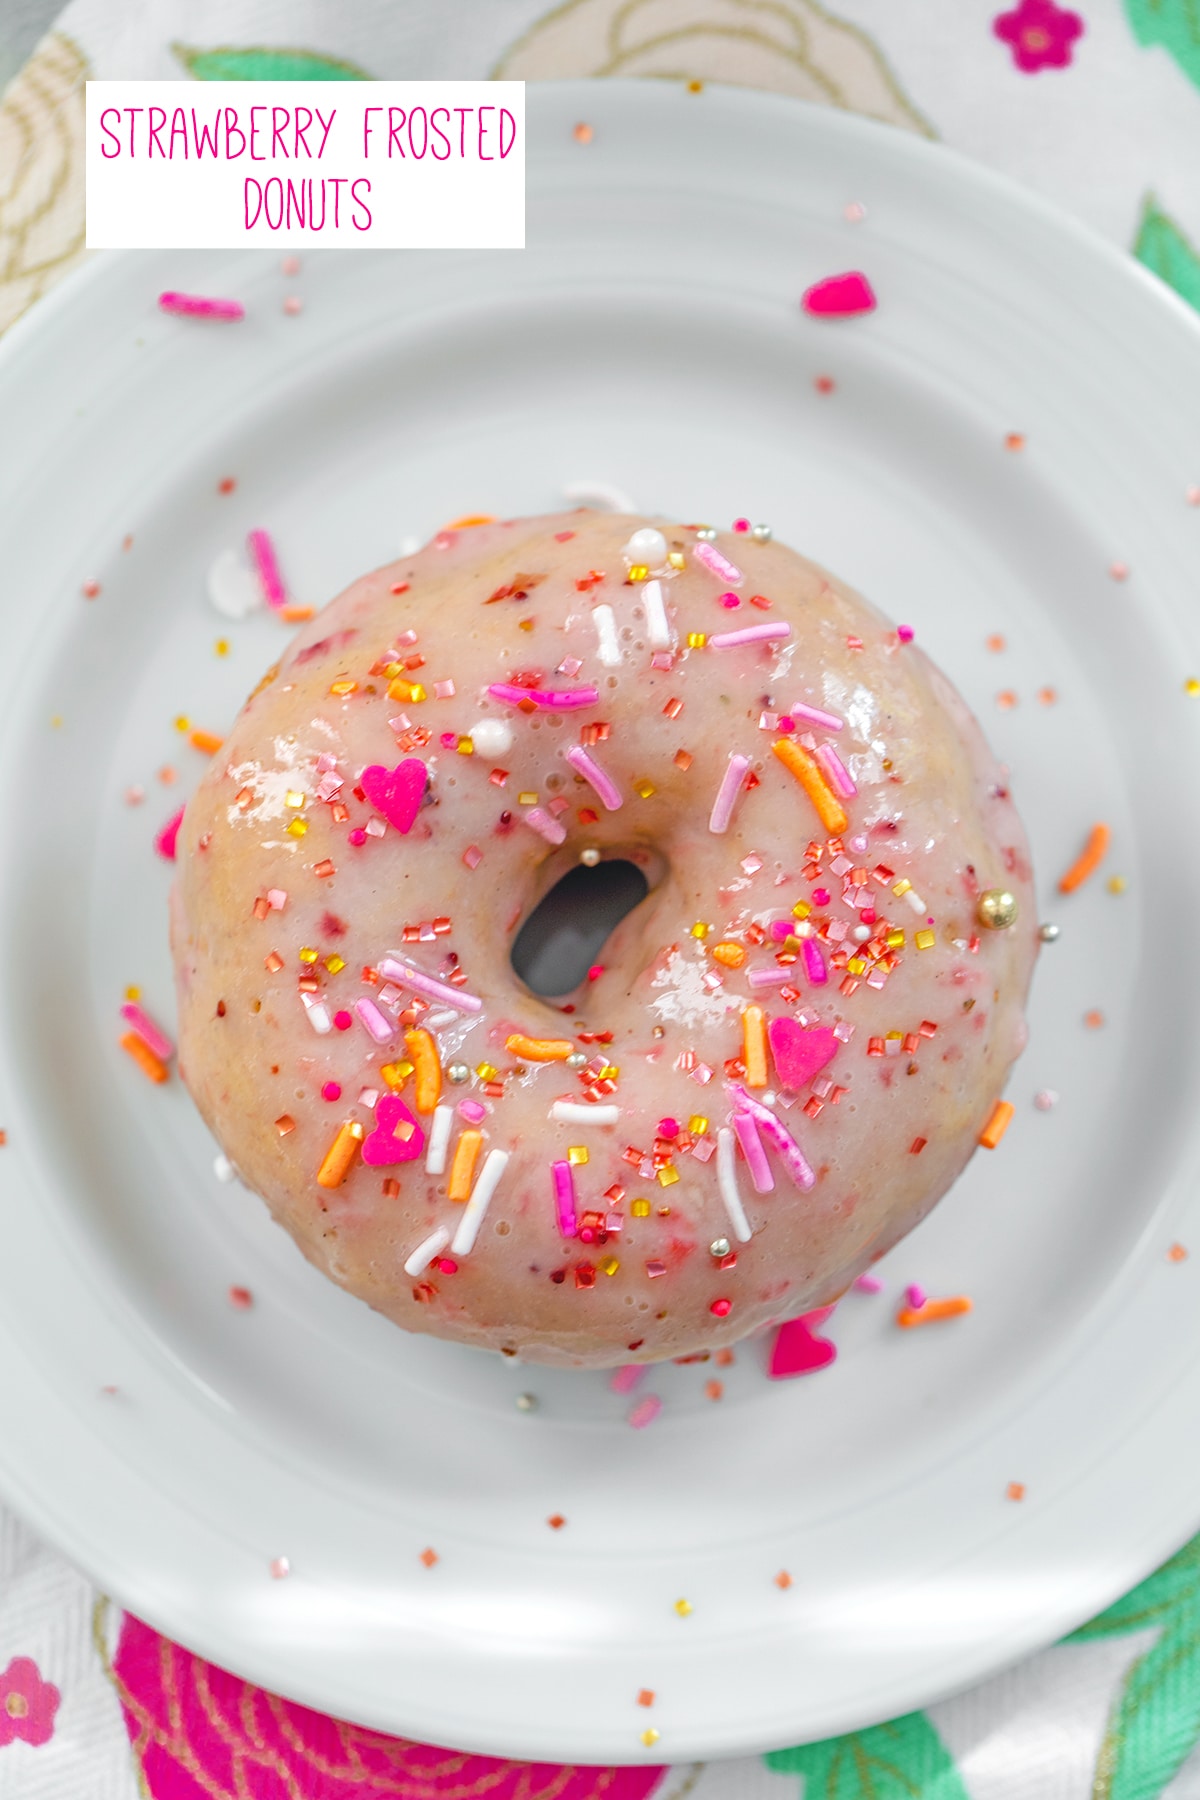 Overhead view of a Strawberry frosted donut covered in pink sprinkles on a white plate with recipe title at top.